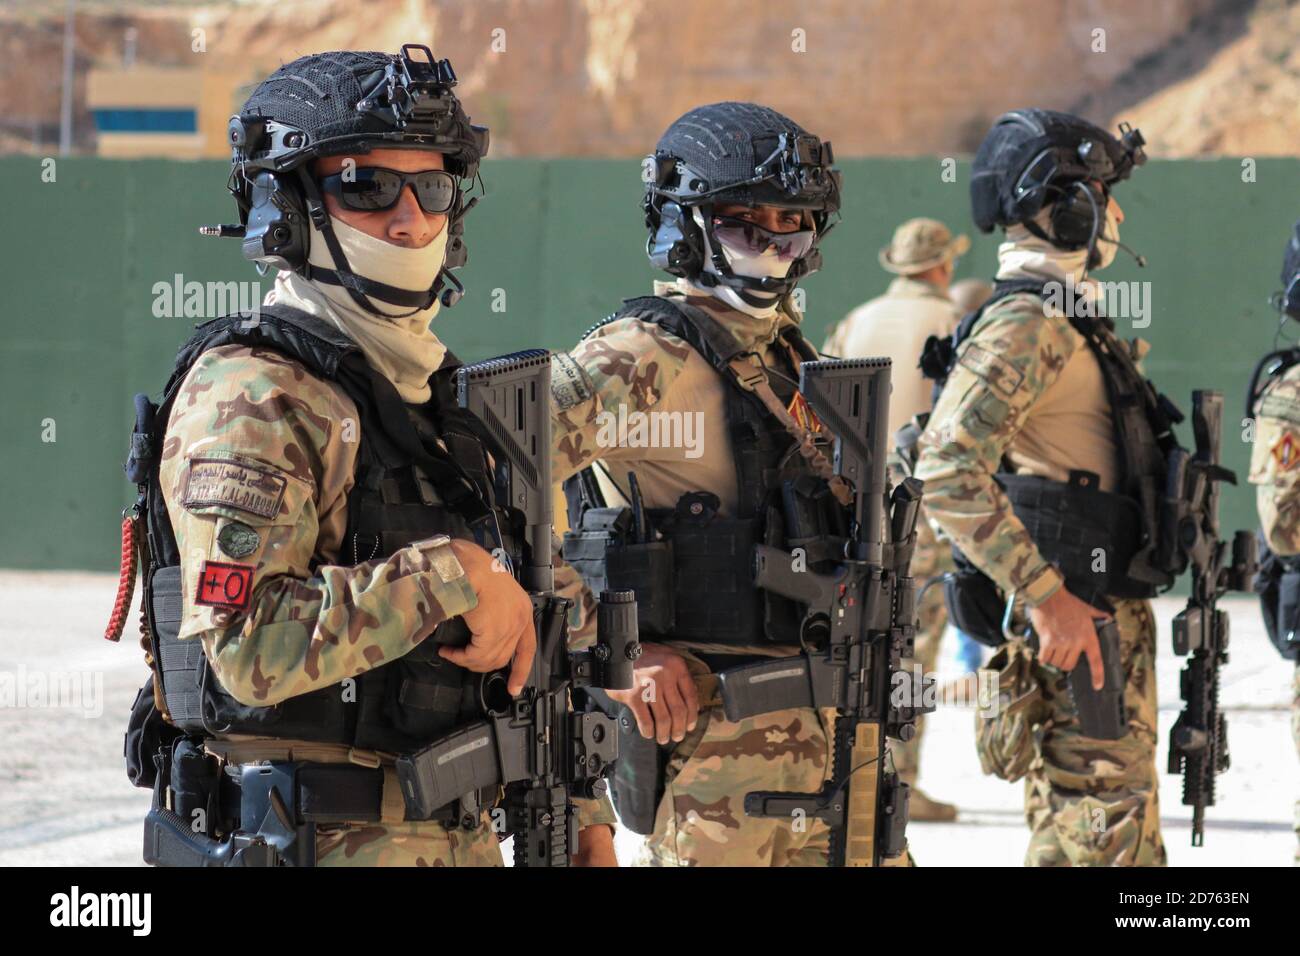 Jordanian Armed Forces Soldiers, Special Unit Two counterterrorism, conducts flat range drills and exercises during Eager Lion on King Abdullah II Special Operations Training Center, April 16, 2018. Eager Lion is a multi-national exercise hosted in Jordan, consisting of U.S. Service Members training with military forces from 19 partner nations, and designed to strengthen military-to-military partnerships and enhance regional stability. (U.S. Army photo by Spc. Jack Oathout) Stock Photo